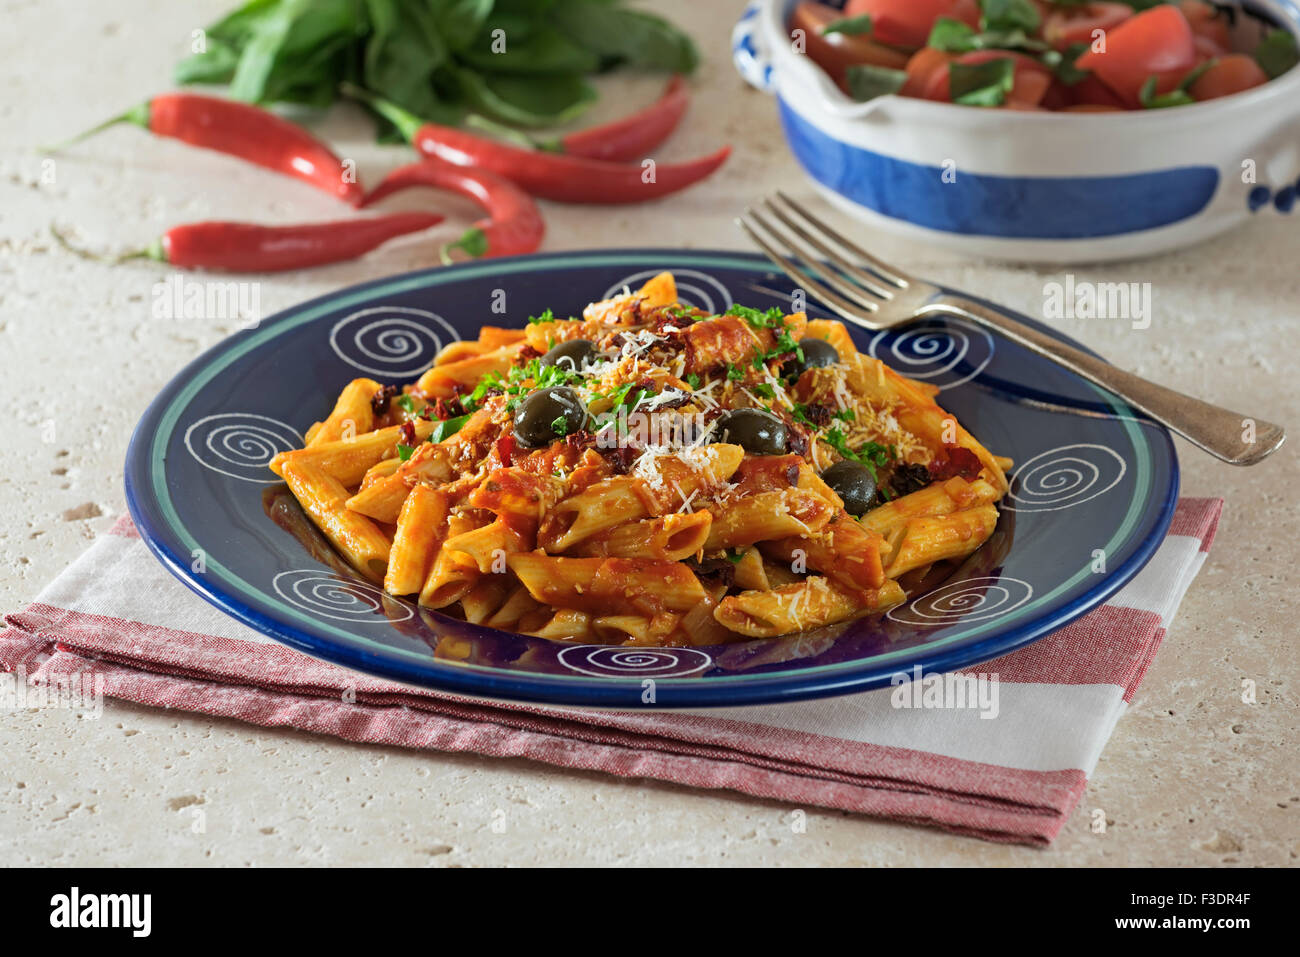 Penne all'Arrabbiata. Pasta in spicy tomato sauce. Italy Food Stock Photo